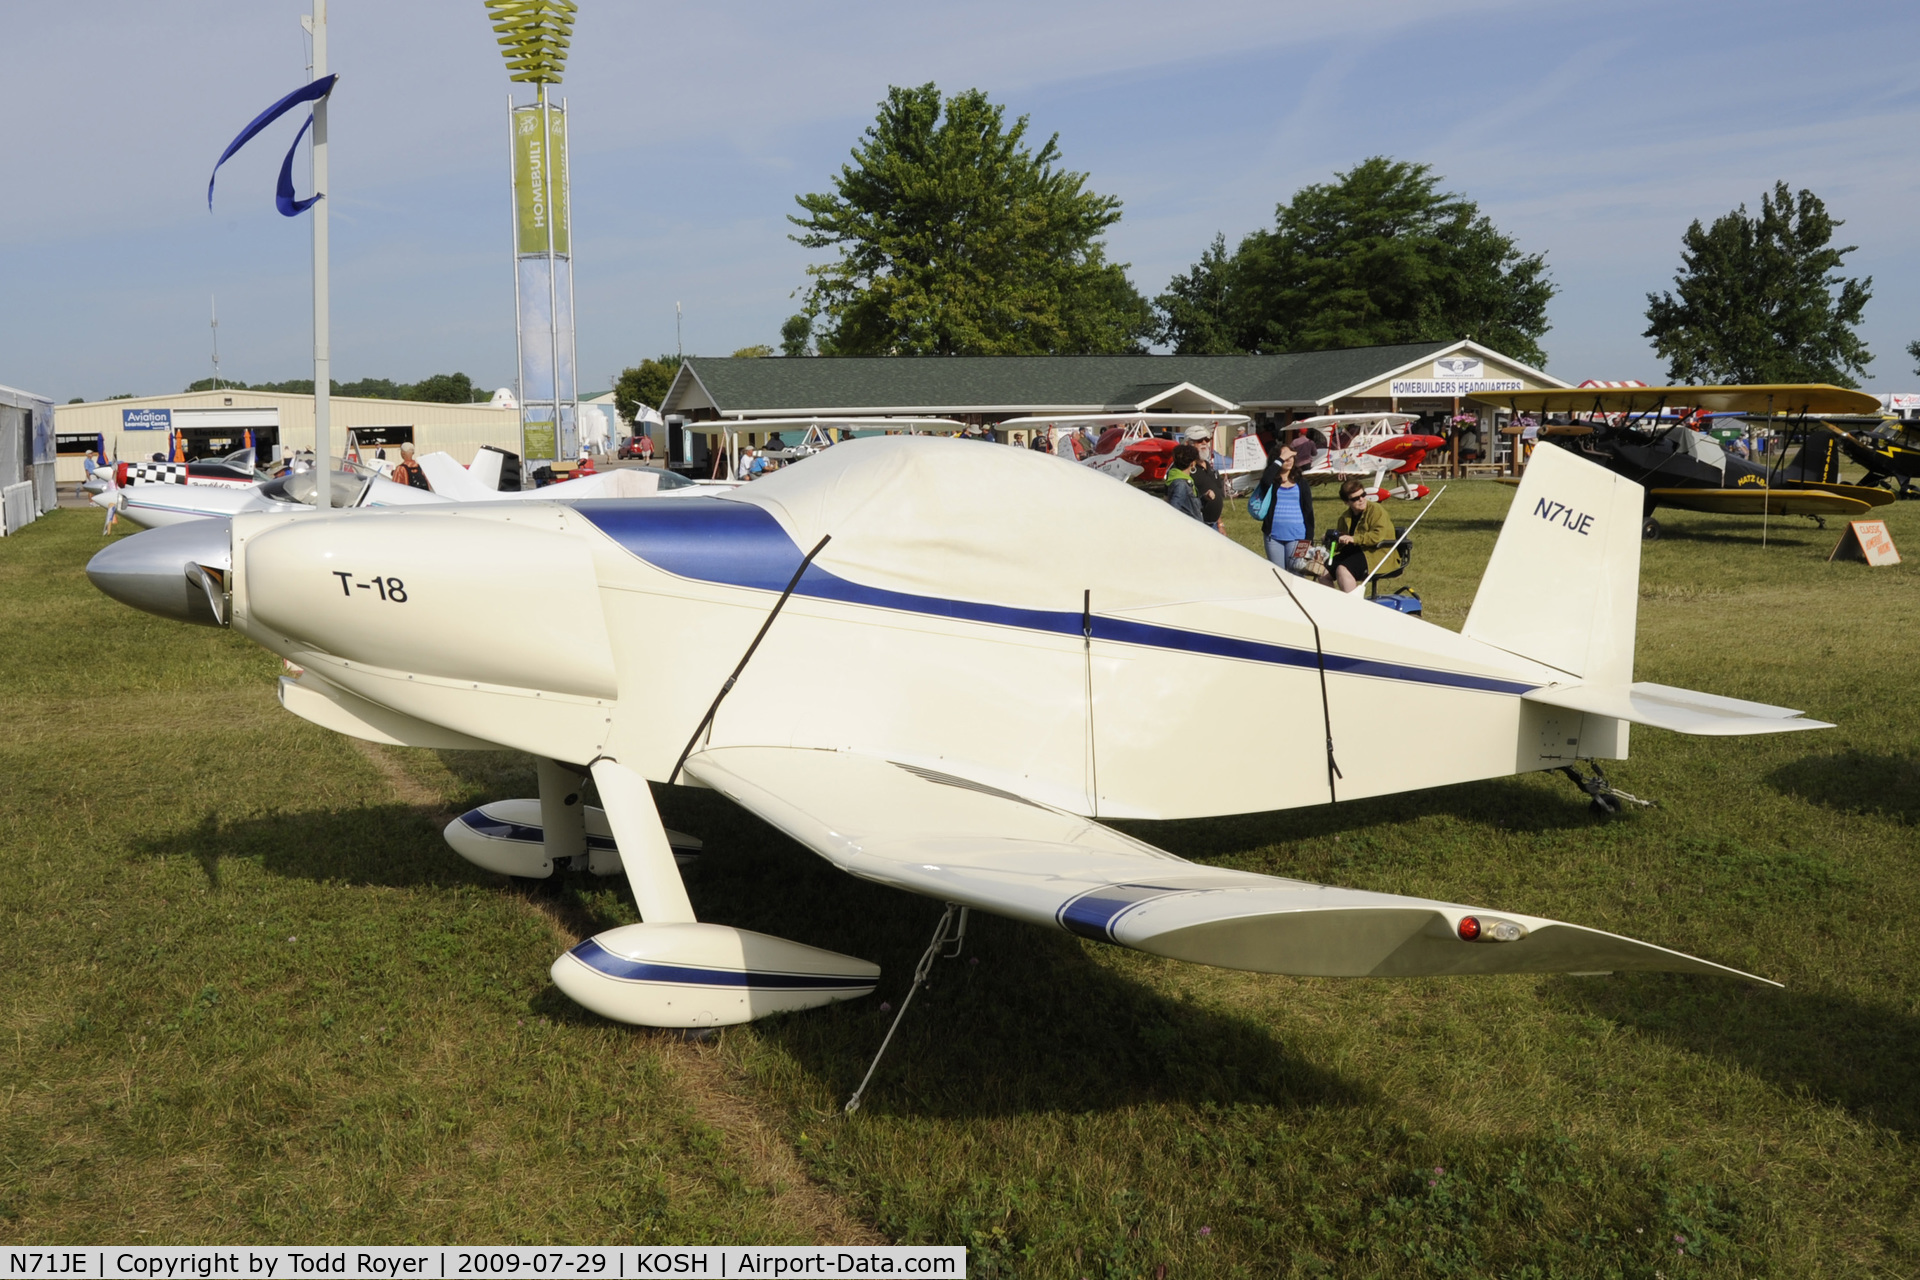 N71JE, Thorp T-18 Tiger C/N 1171, Oshkosh EAA Fly-in 2009